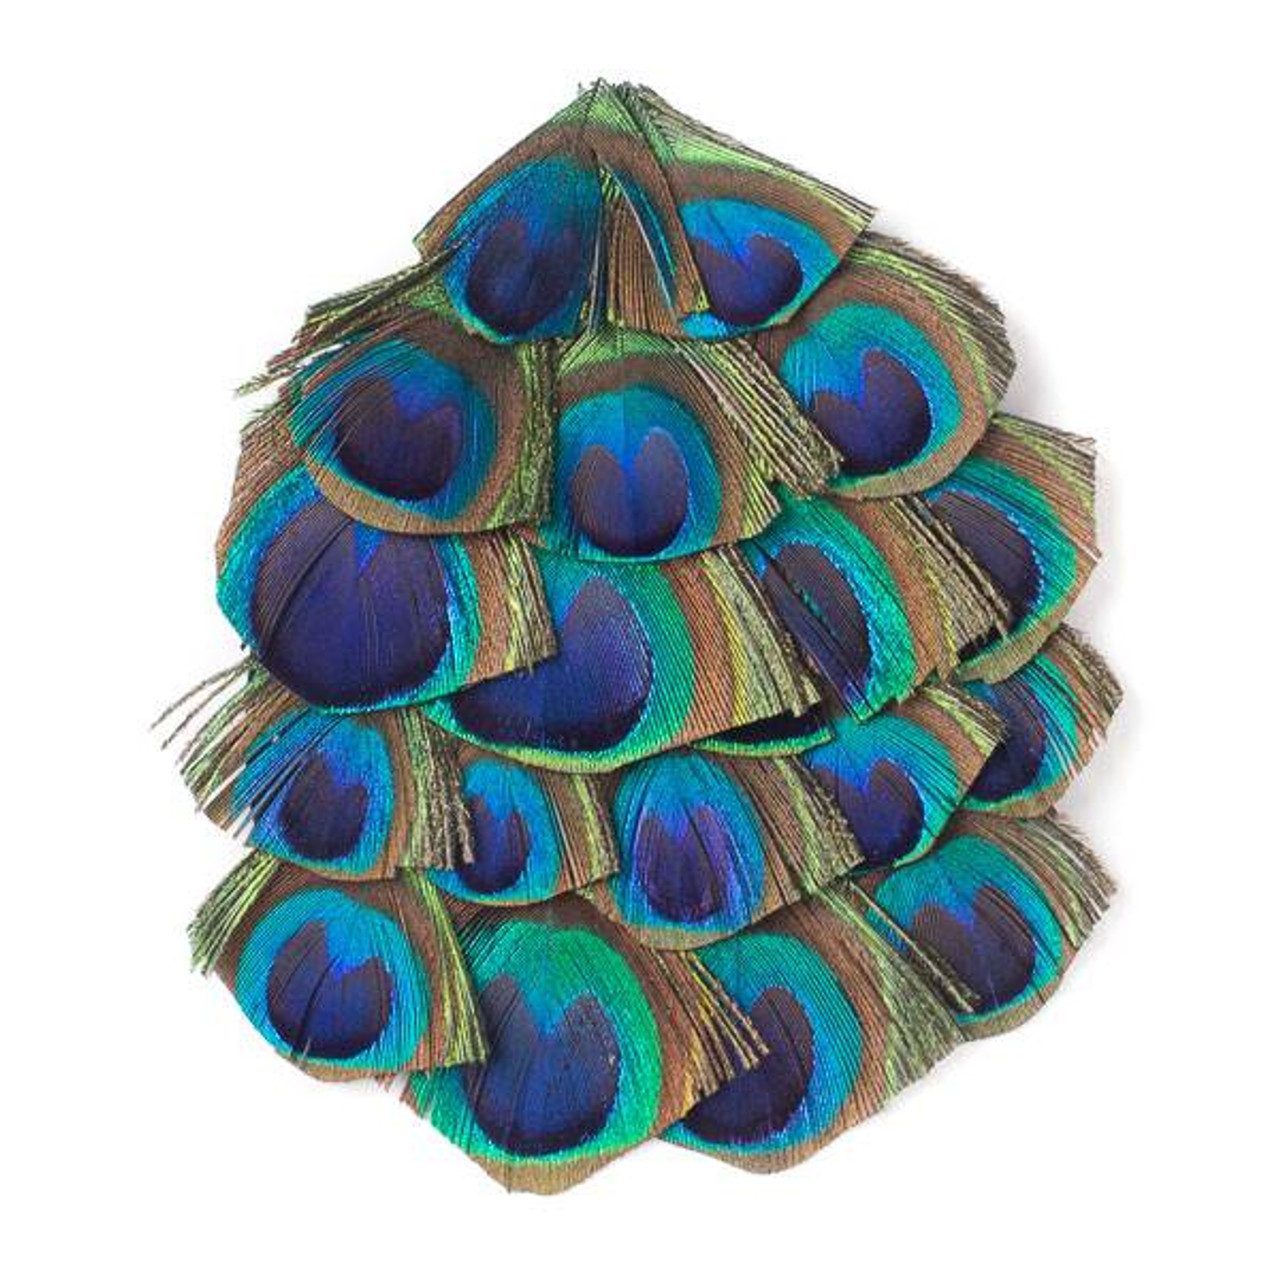 4-6inches DIY Peacock Feather Eyes Earrings Decoration Free